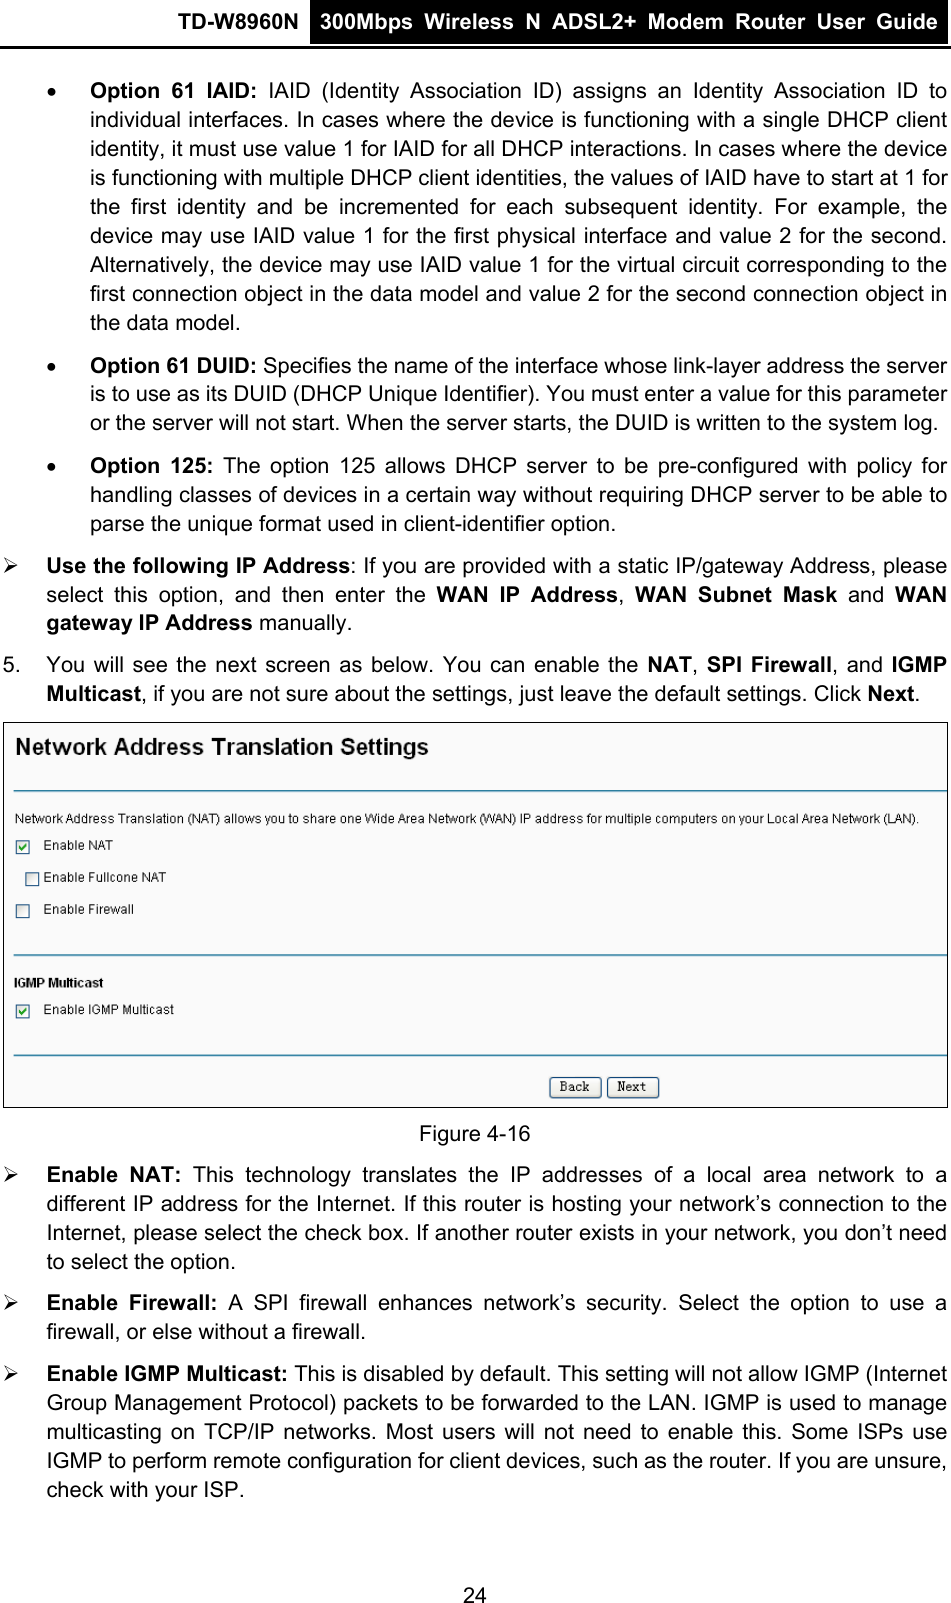 TD-W8960N  300Mbps Wireless N ADSL2+ Modem Router User Guide   Option 61 IAID: IAID (Identity Association ID) assigns an Identity Association ID to individual interfaces. In cases where the device is functioning with a single DHCP client identity, it must use value 1 for IAID for all DHCP interactions. In cases where the device is functioning with multiple DHCP client identities, the values of IAID have to start at 1 for the first identity and be incremented for each subsequent identity. For example, the device may use IAID value 1 for the first physical interface and value 2 for the second. Alternatively, the device may use IAID value 1 for the virtual circuit corresponding to the first connection object in the data model and value 2 for the second connection object in the data model.  Option 61 DUID: Specifies the name of the interface whose link-layer address the server is to use as its DUID (DHCP Unique Identifier). You must enter a value for this parameter or the server will not start. When the server starts, the DUID is written to the system log.  Option 125: The option 125 allows DHCP server to be pre-configured with policy for handling classes of devices in a certain way without requiring DHCP server to be able to parse the unique format used in client-identifier option.    Use the following IP Address: If you are provided with a static IP/gateway Address, please select this option, and then enter the WAN IP Address,  WAN Subnet Mask and WAN gateway IP Address manually. 5.  You will see the next screen as below. You can enable the NAT,  SPI Firewall, and IGMP Multicast, if you are not sure about the settings, just leave the default settings. Click Next.  Figure 4-16  Enable NAT: This technology translates the IP addresses of a local area network to a different IP address for the Internet. If this router is hosting your network’s connection to the Internet, please select the check box. If another router exists in your network, you don’t need to select the option.  Enable Firewall: A SPI firewall enhances network’s security. Select the option to use a firewall, or else without a firewall.  Enable IGMP Multicast: This is disabled by default. This setting will not allow IGMP (Internet Group Management Protocol) packets to be forwarded to the LAN. IGMP is used to manage multicasting on TCP/IP networks. Most users will not need to enable this. Some ISPs use IGMP to perform remote configuration for client devices, such as the router. If you are unsure, check with your ISP. 24 